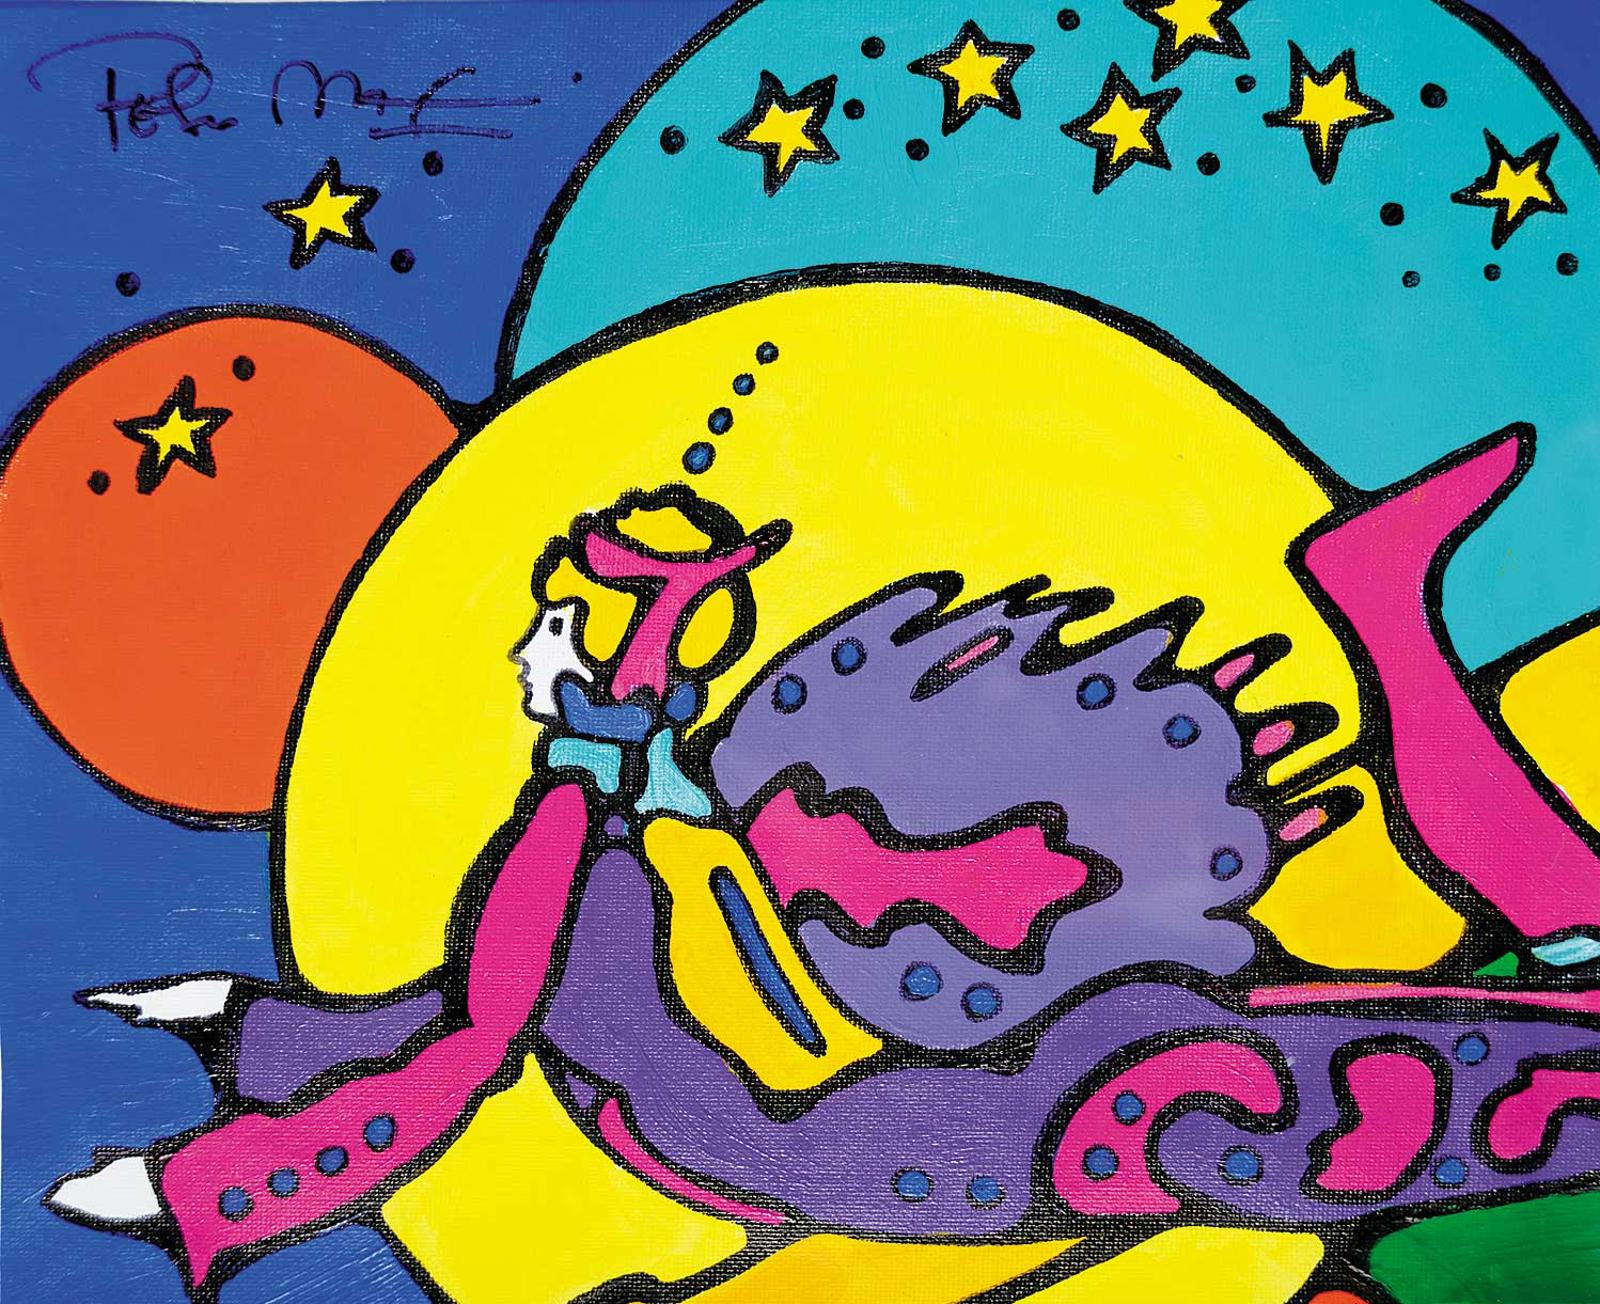 Peter Max (1937) - Untitled - Zen Max Series - Flying Through the Universe